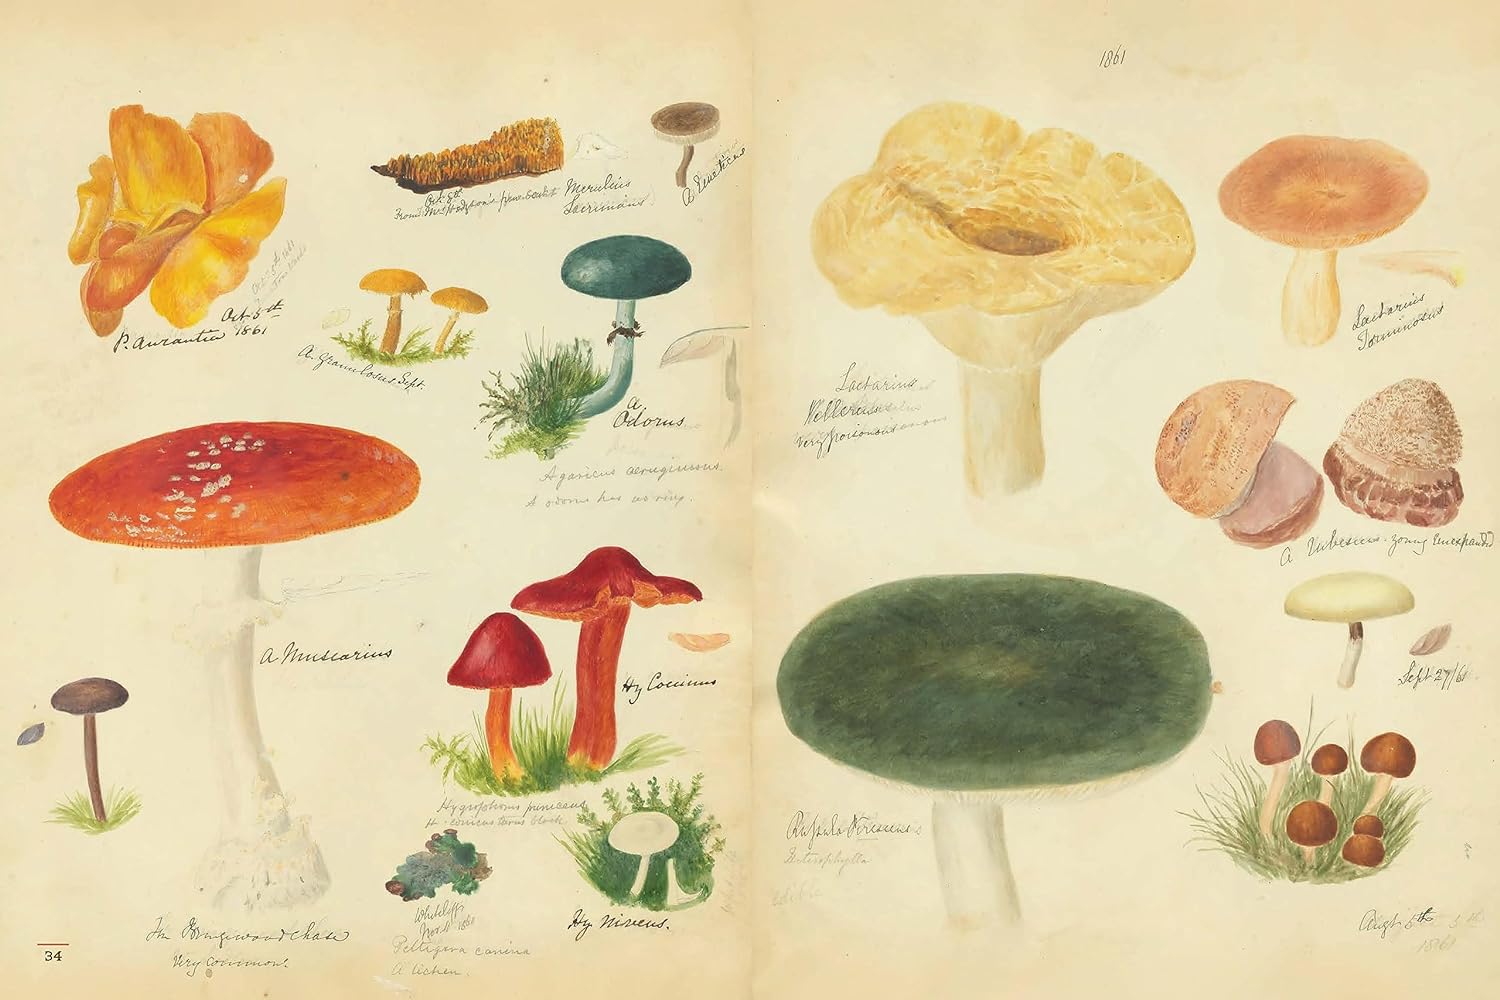 Fungi Collected in Shropshire and Other Neighbourhoods: A Victorian Woman’s Illustrated Field Notes (M. F. Lewis)